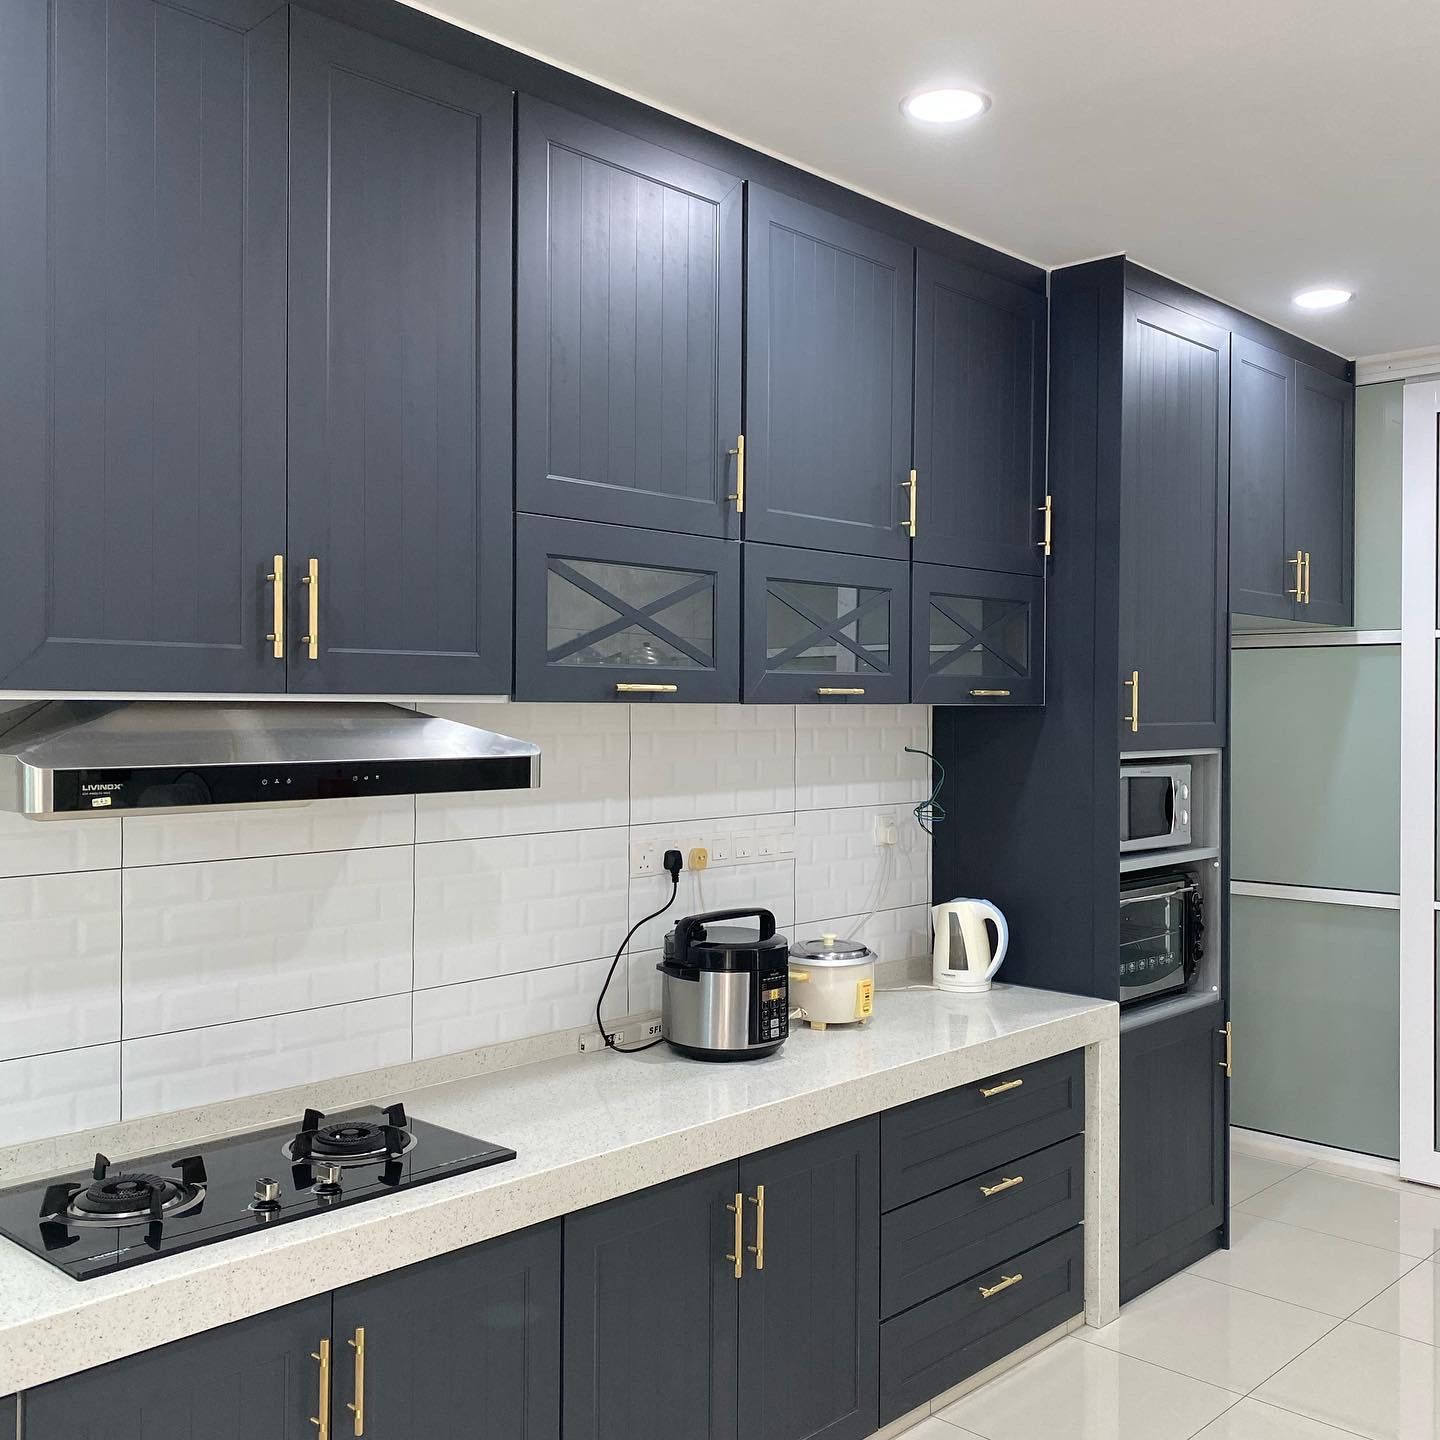 Aluminum Kitchen Cabinet Singapore: The Best Options For Your Lovely Kitchen